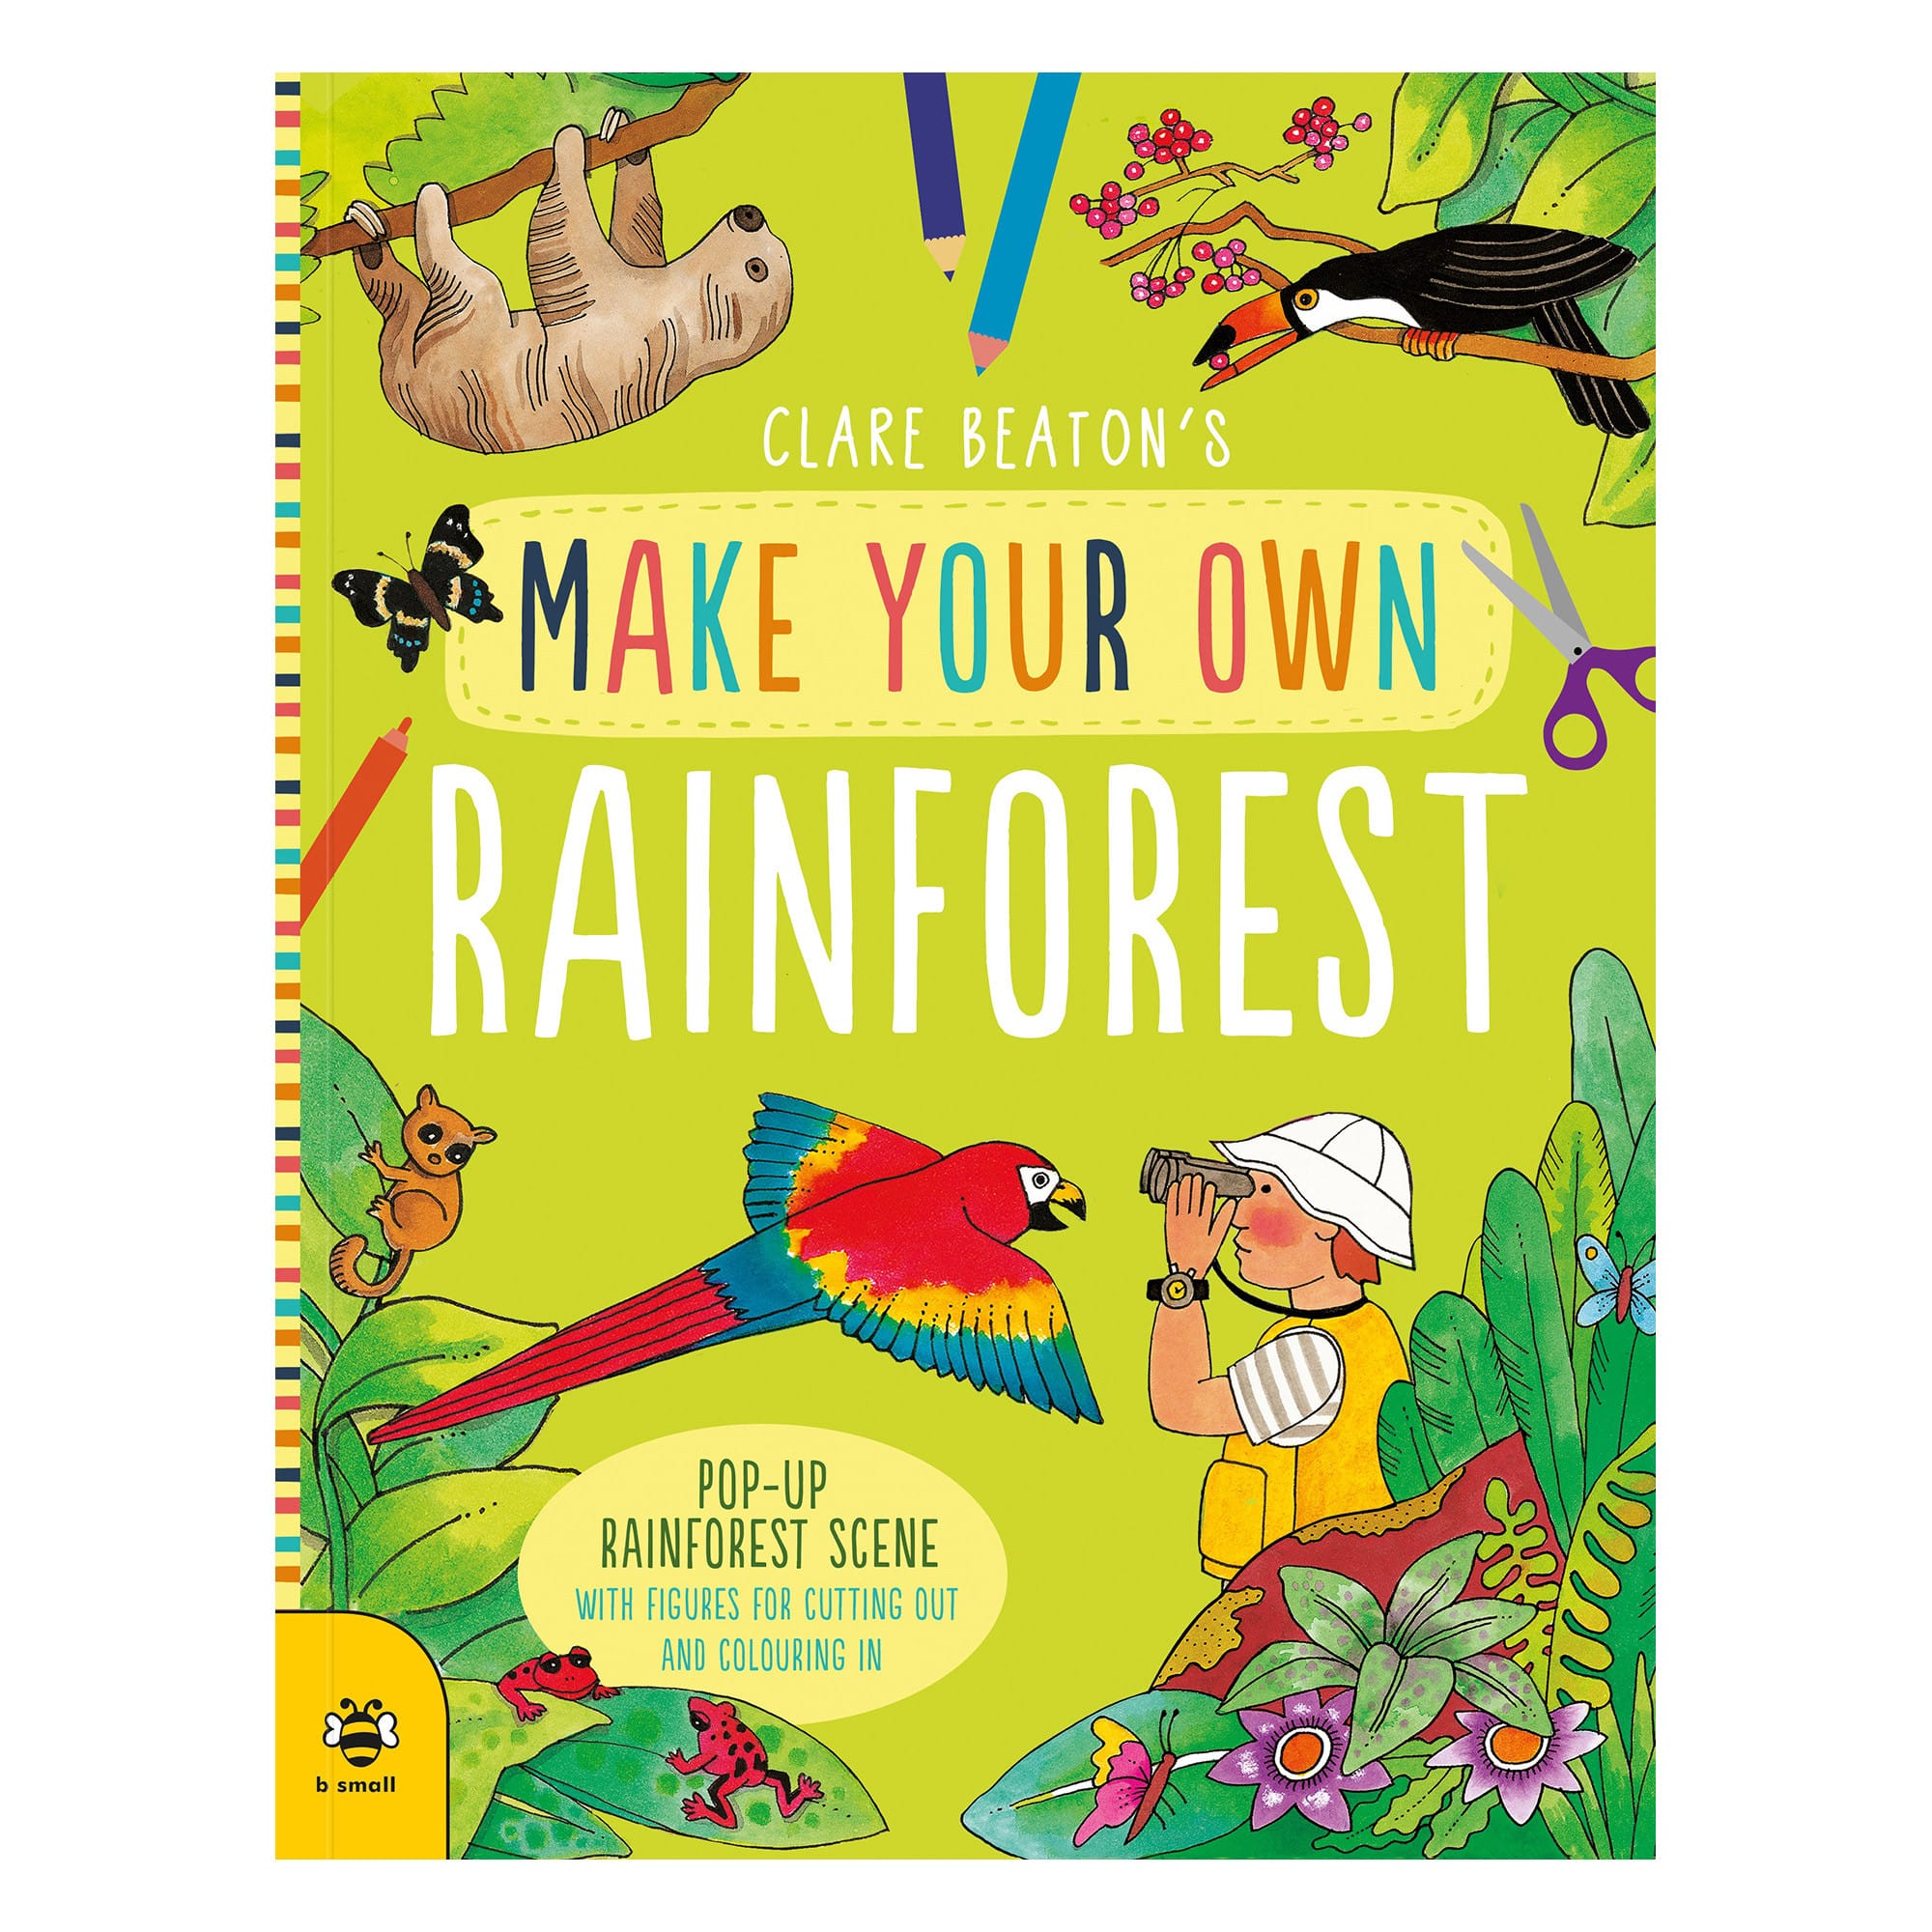 Make Your Own Rainforest - By Clare Beaton